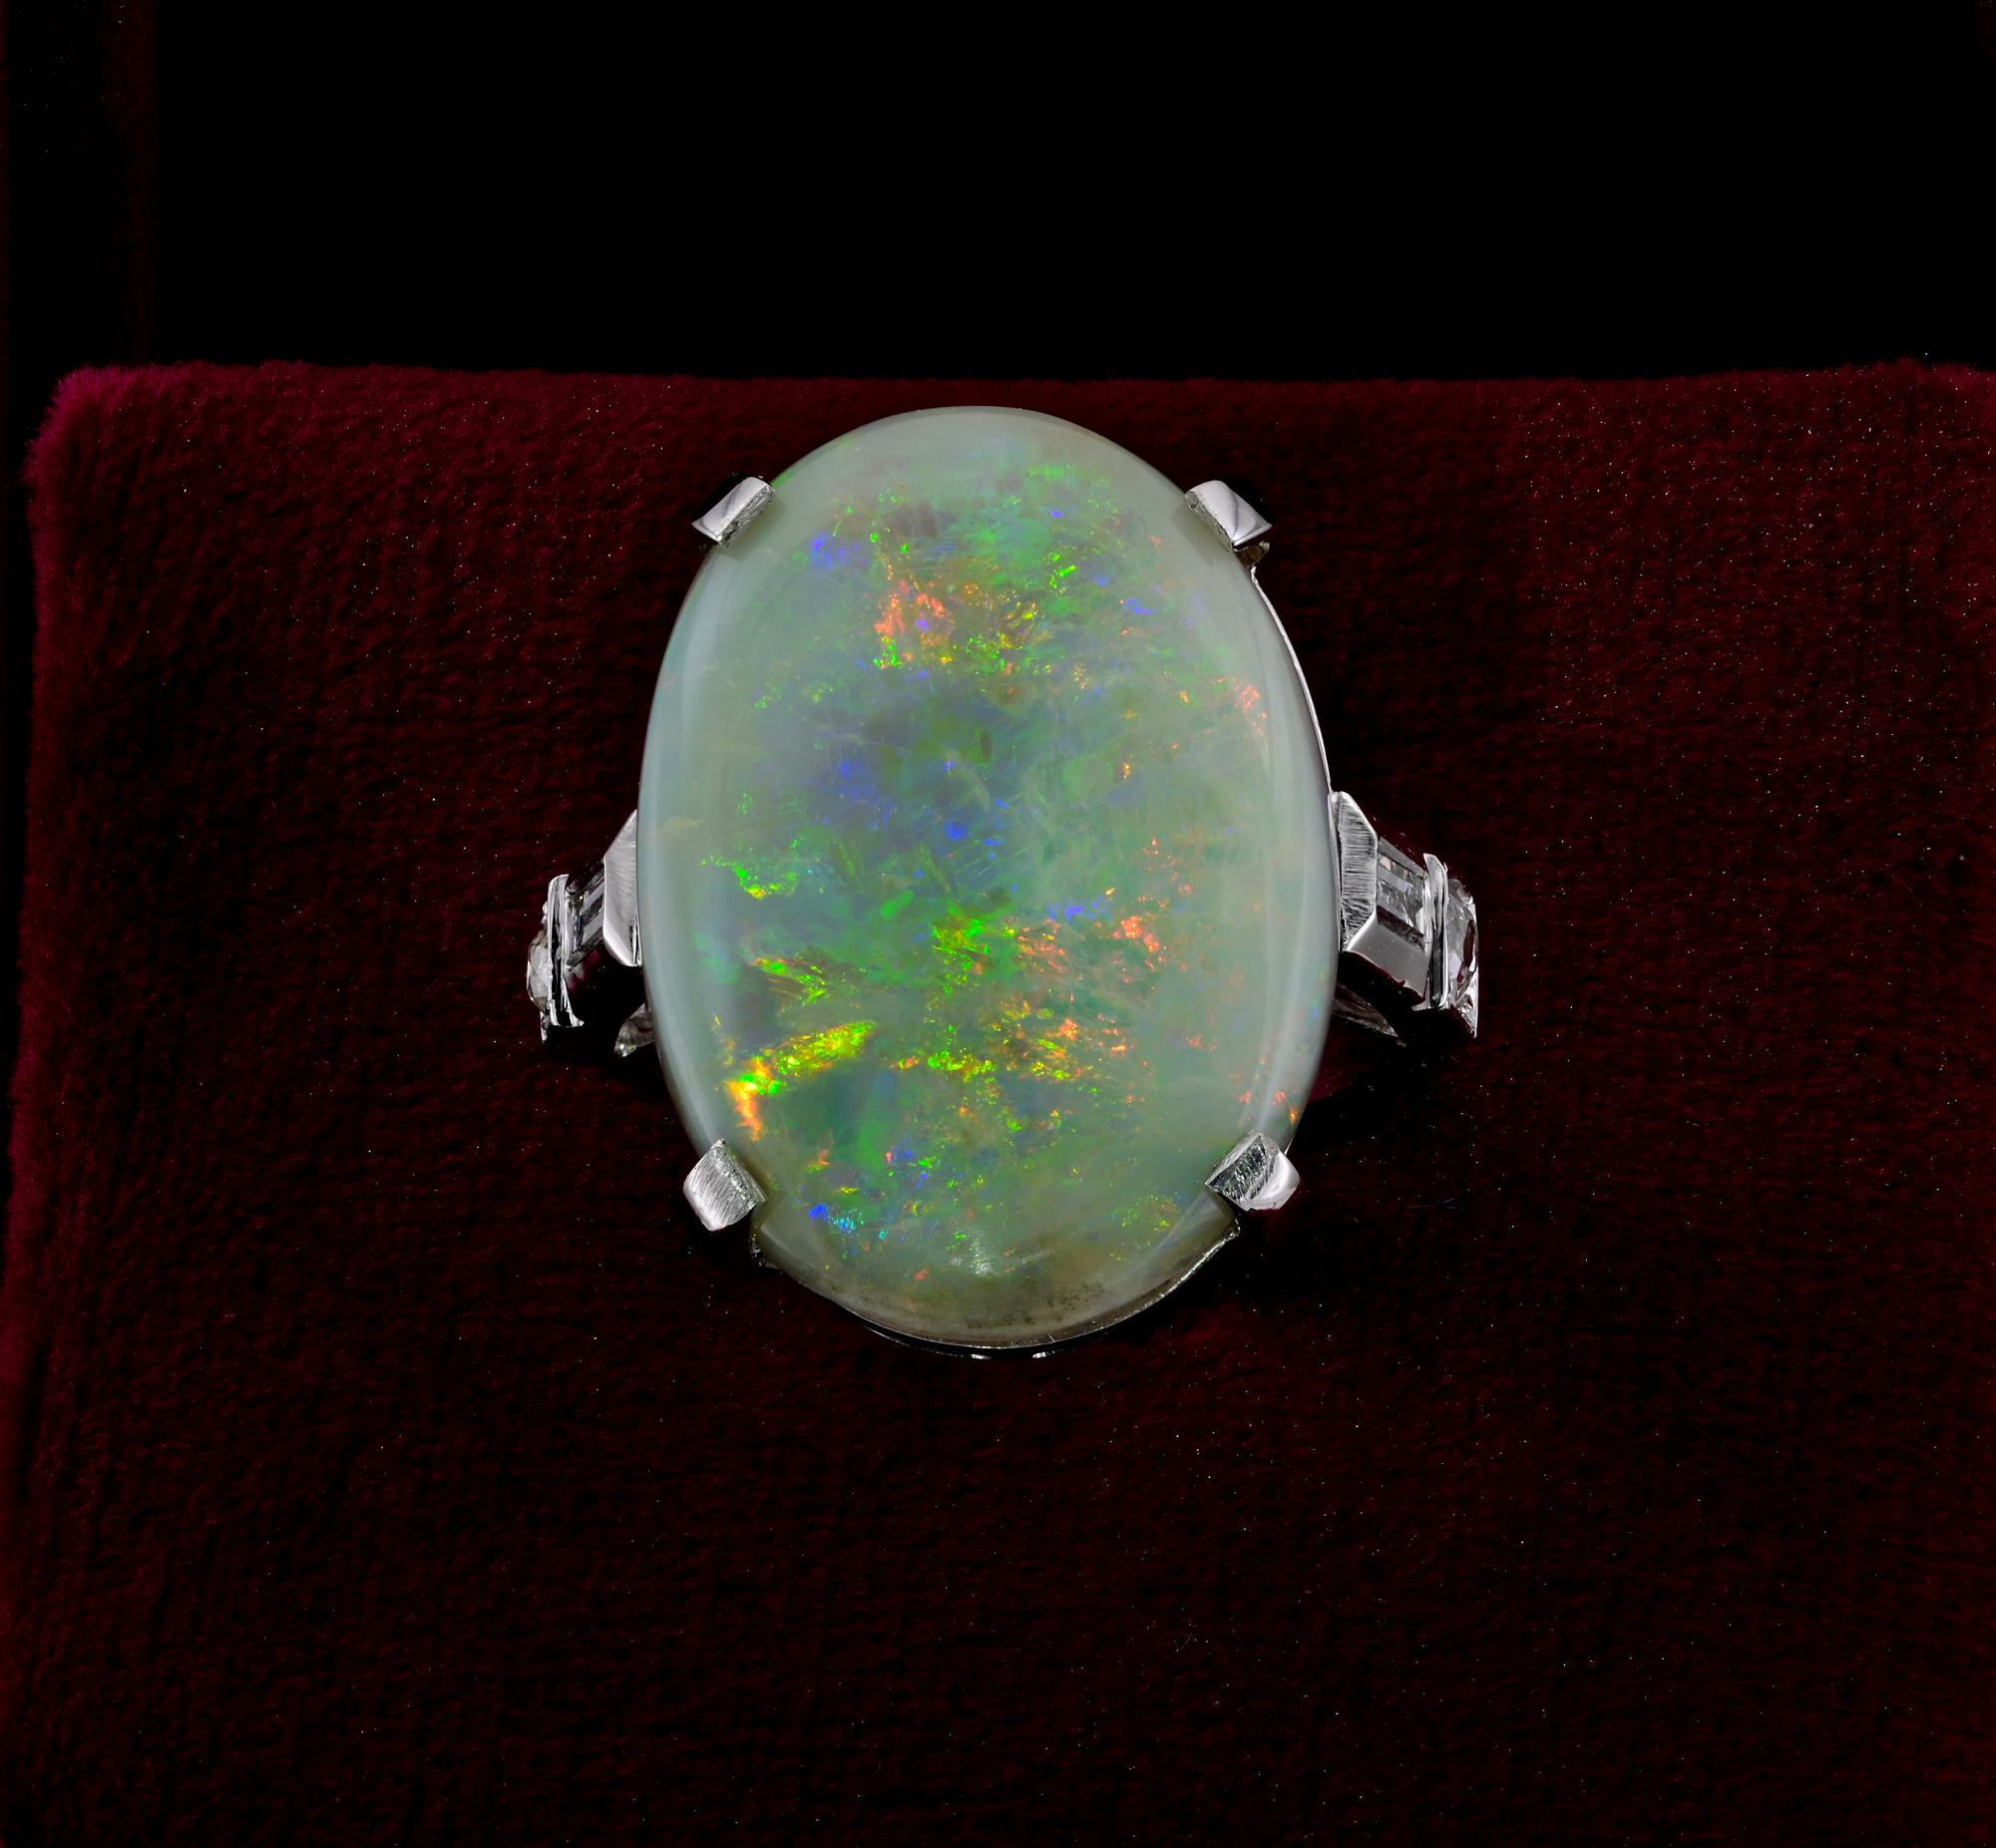 Impressive Opal and Diamond ring, 1960 ca
Exquisitely hand crafted of solid 18 KT white gold in a classy solitaire design with Diamond complement on shoulders
The large Natural solid Australian Opal displays a Kaleidoscope of colours of green, pink,